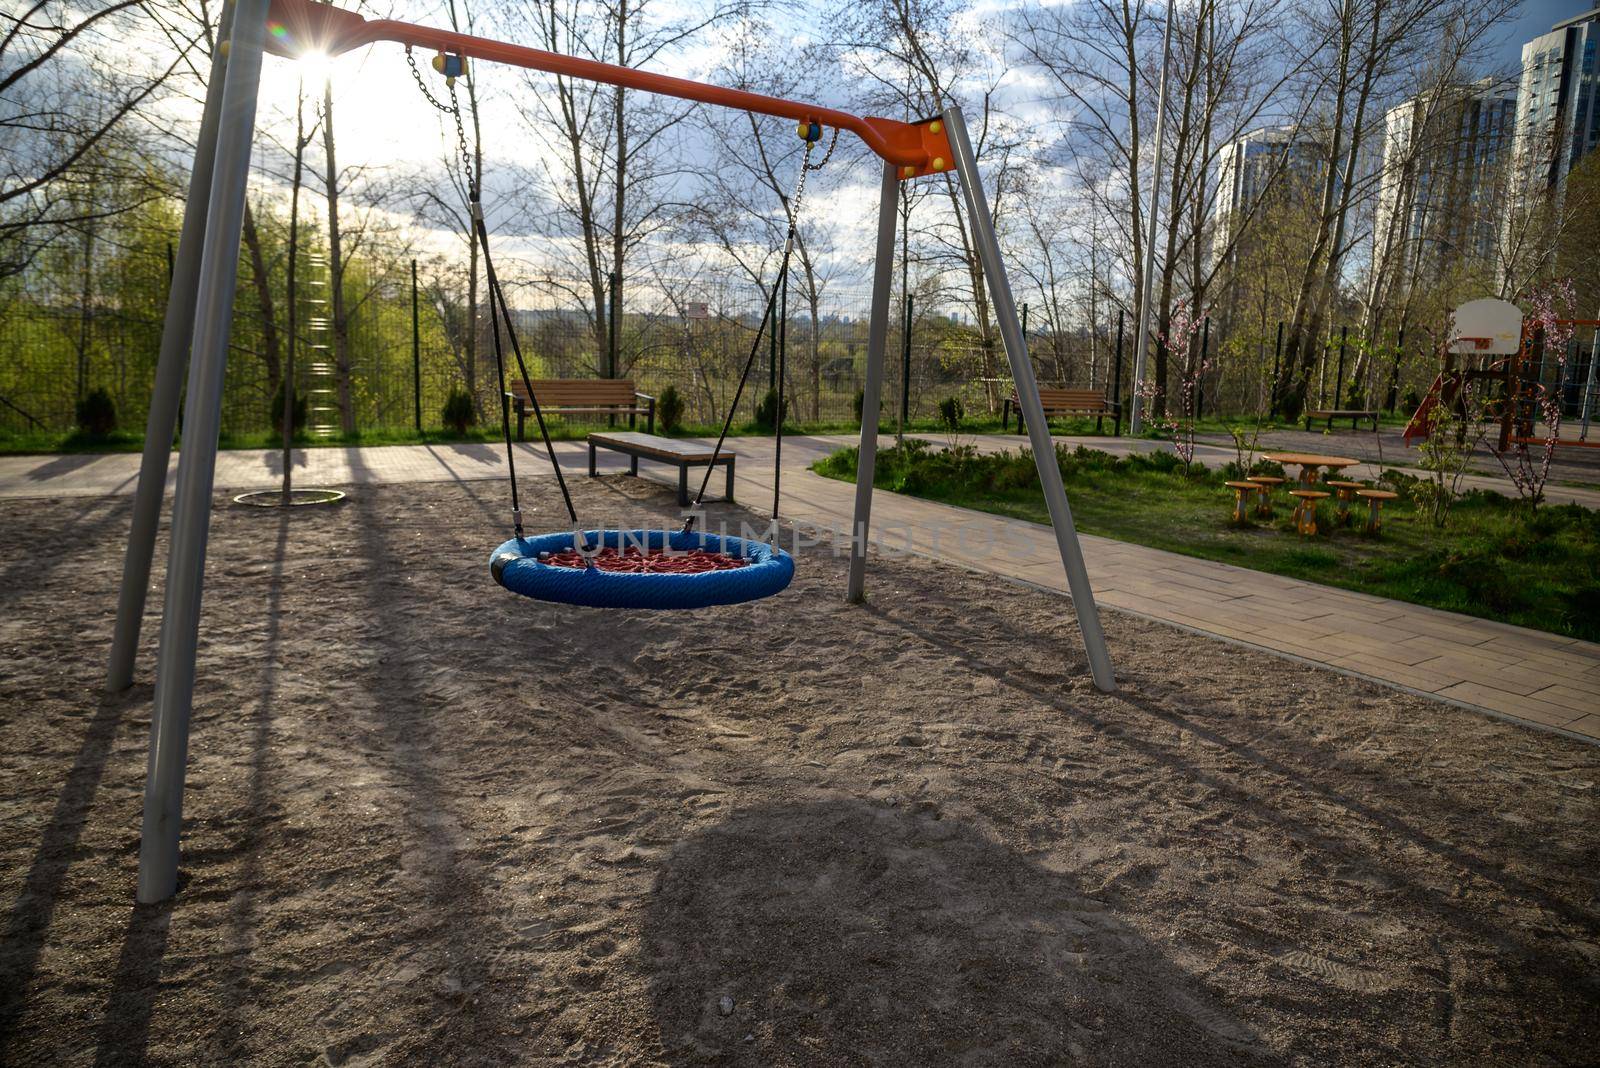 Round swing seat made of mesh in playground. Empty blue and red rope web nest for swinging closeup. children's swing High quality photo.